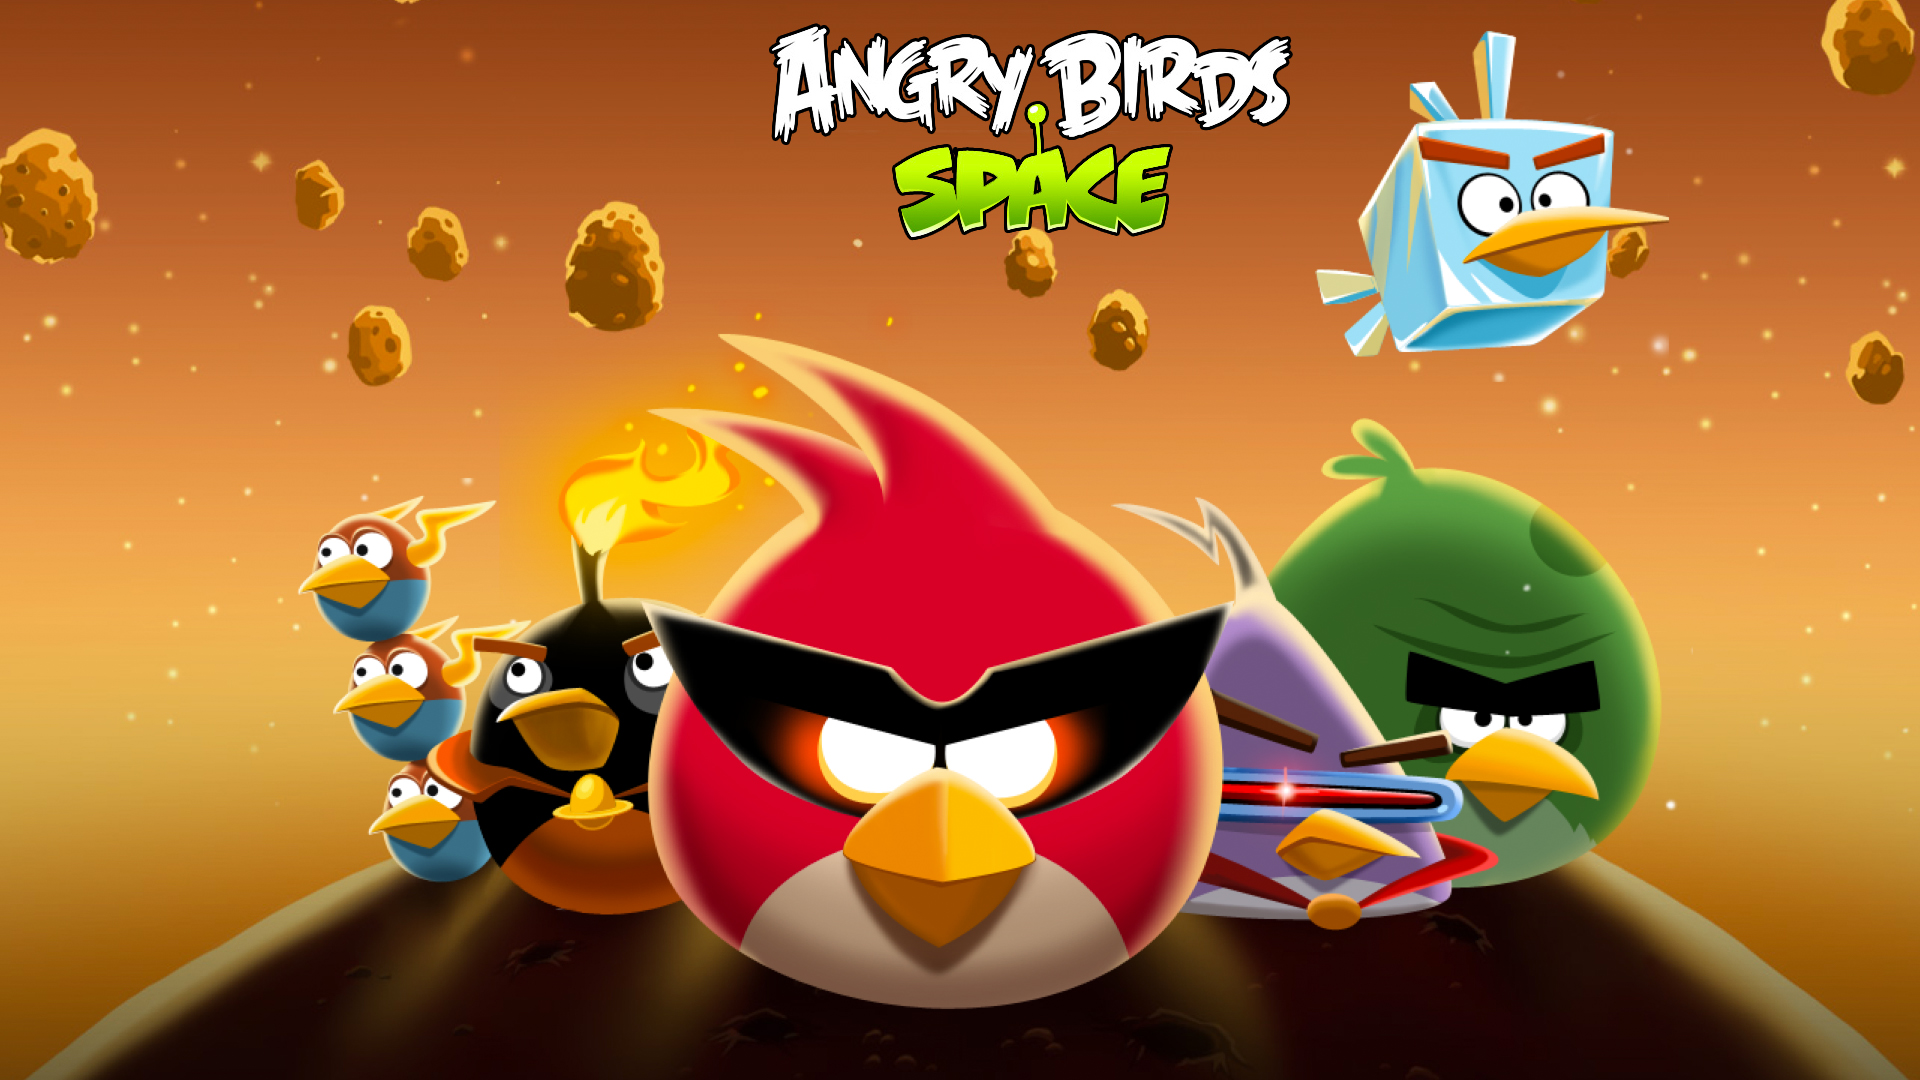 angry birds space wallpaper collection for desktops ipad angry birds